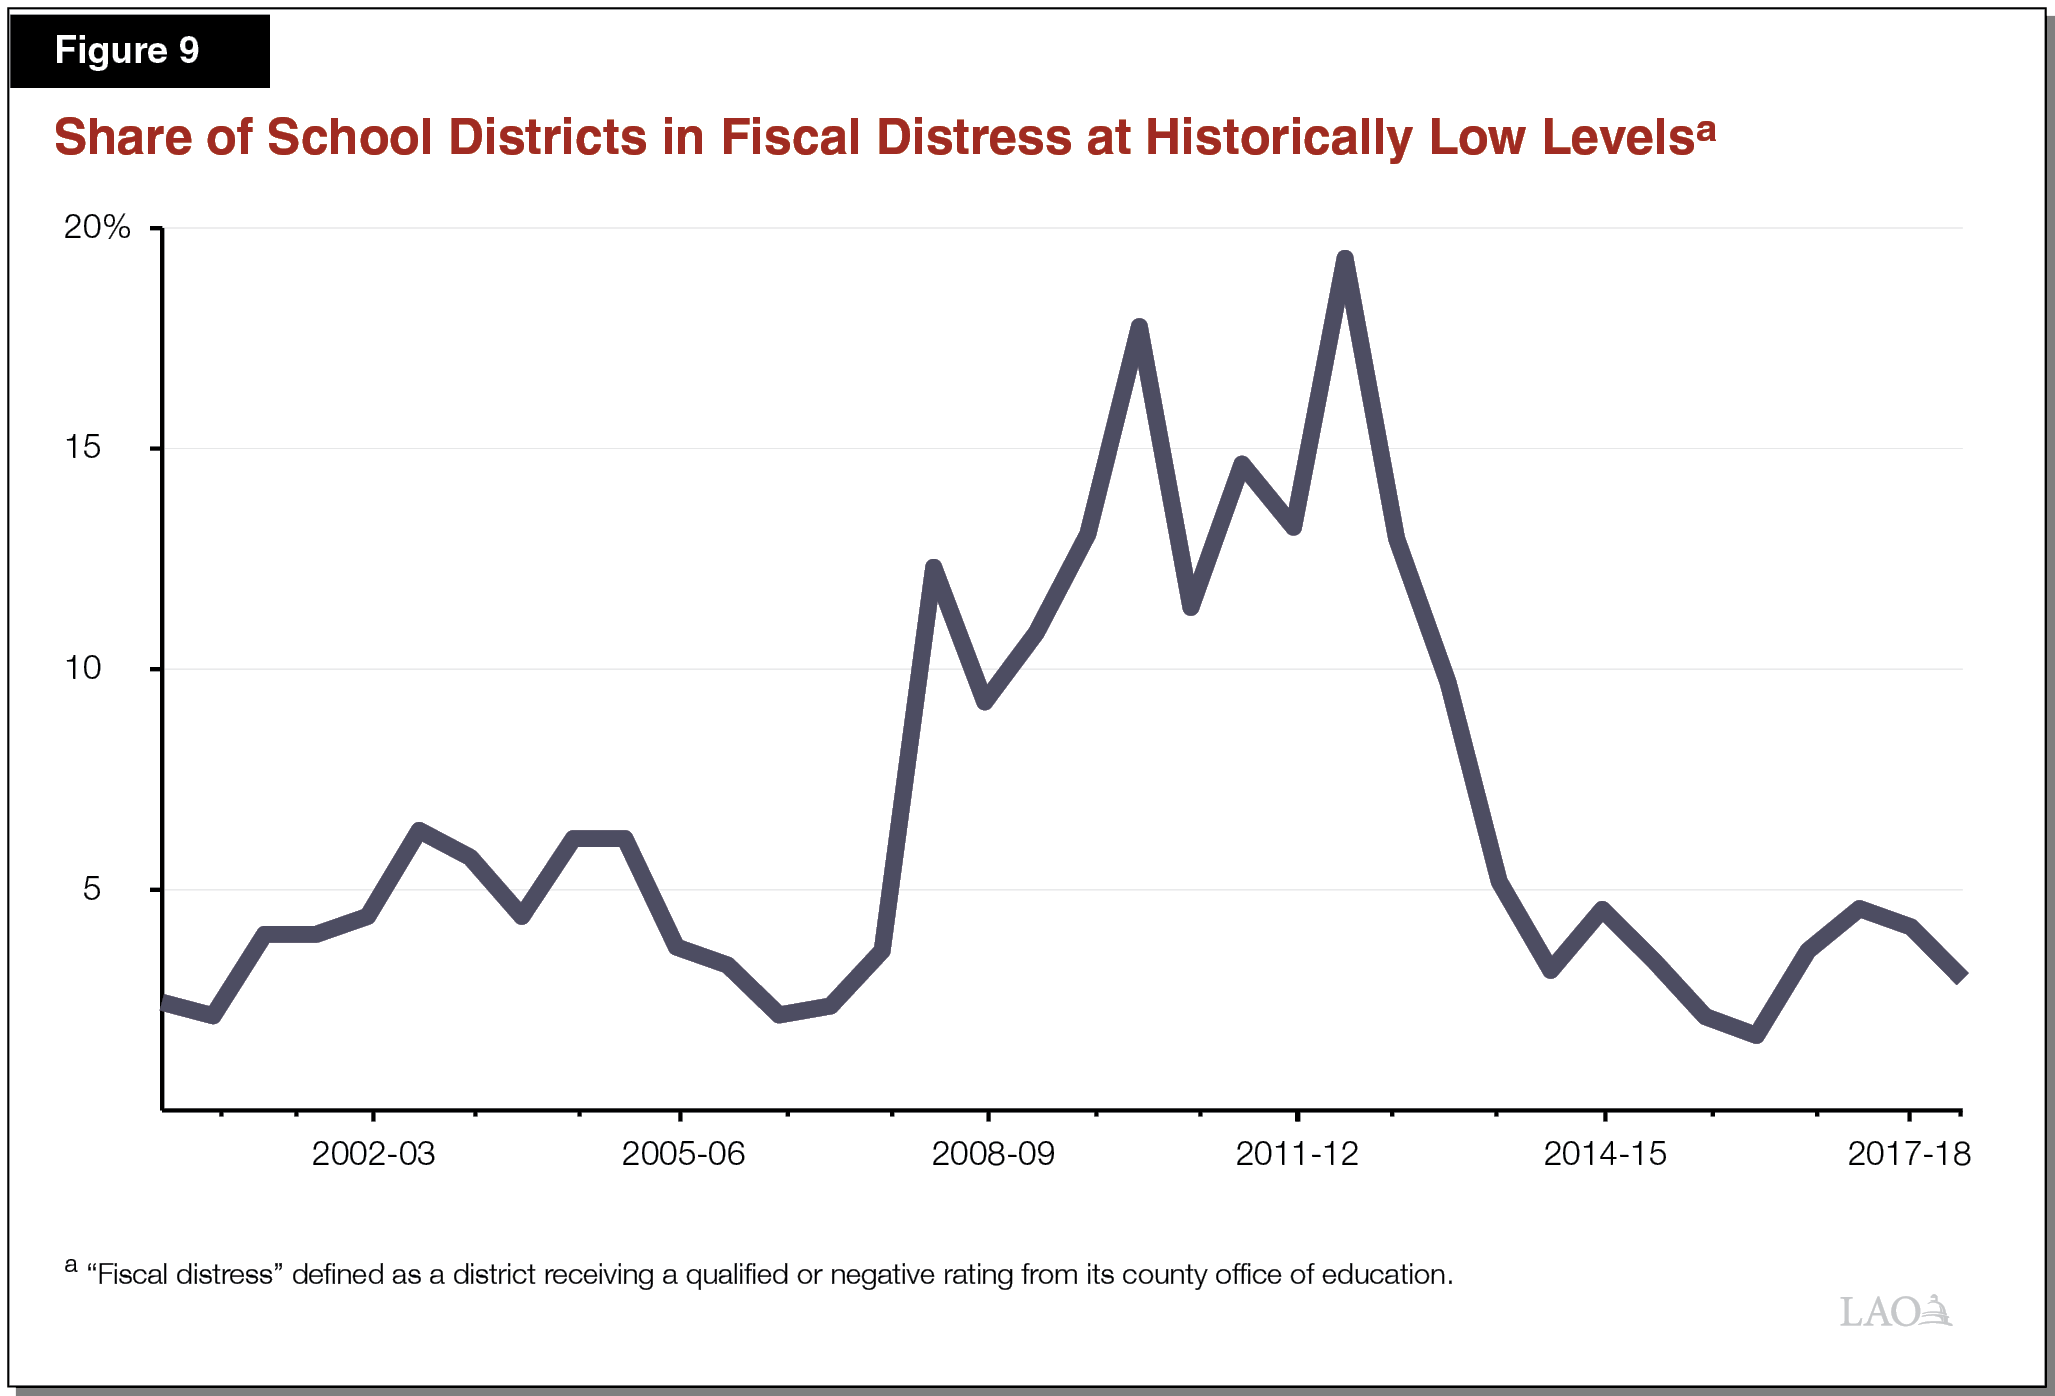 Figure 9 - Share of School Districts in Fiscal Distress at Historically Low Levels